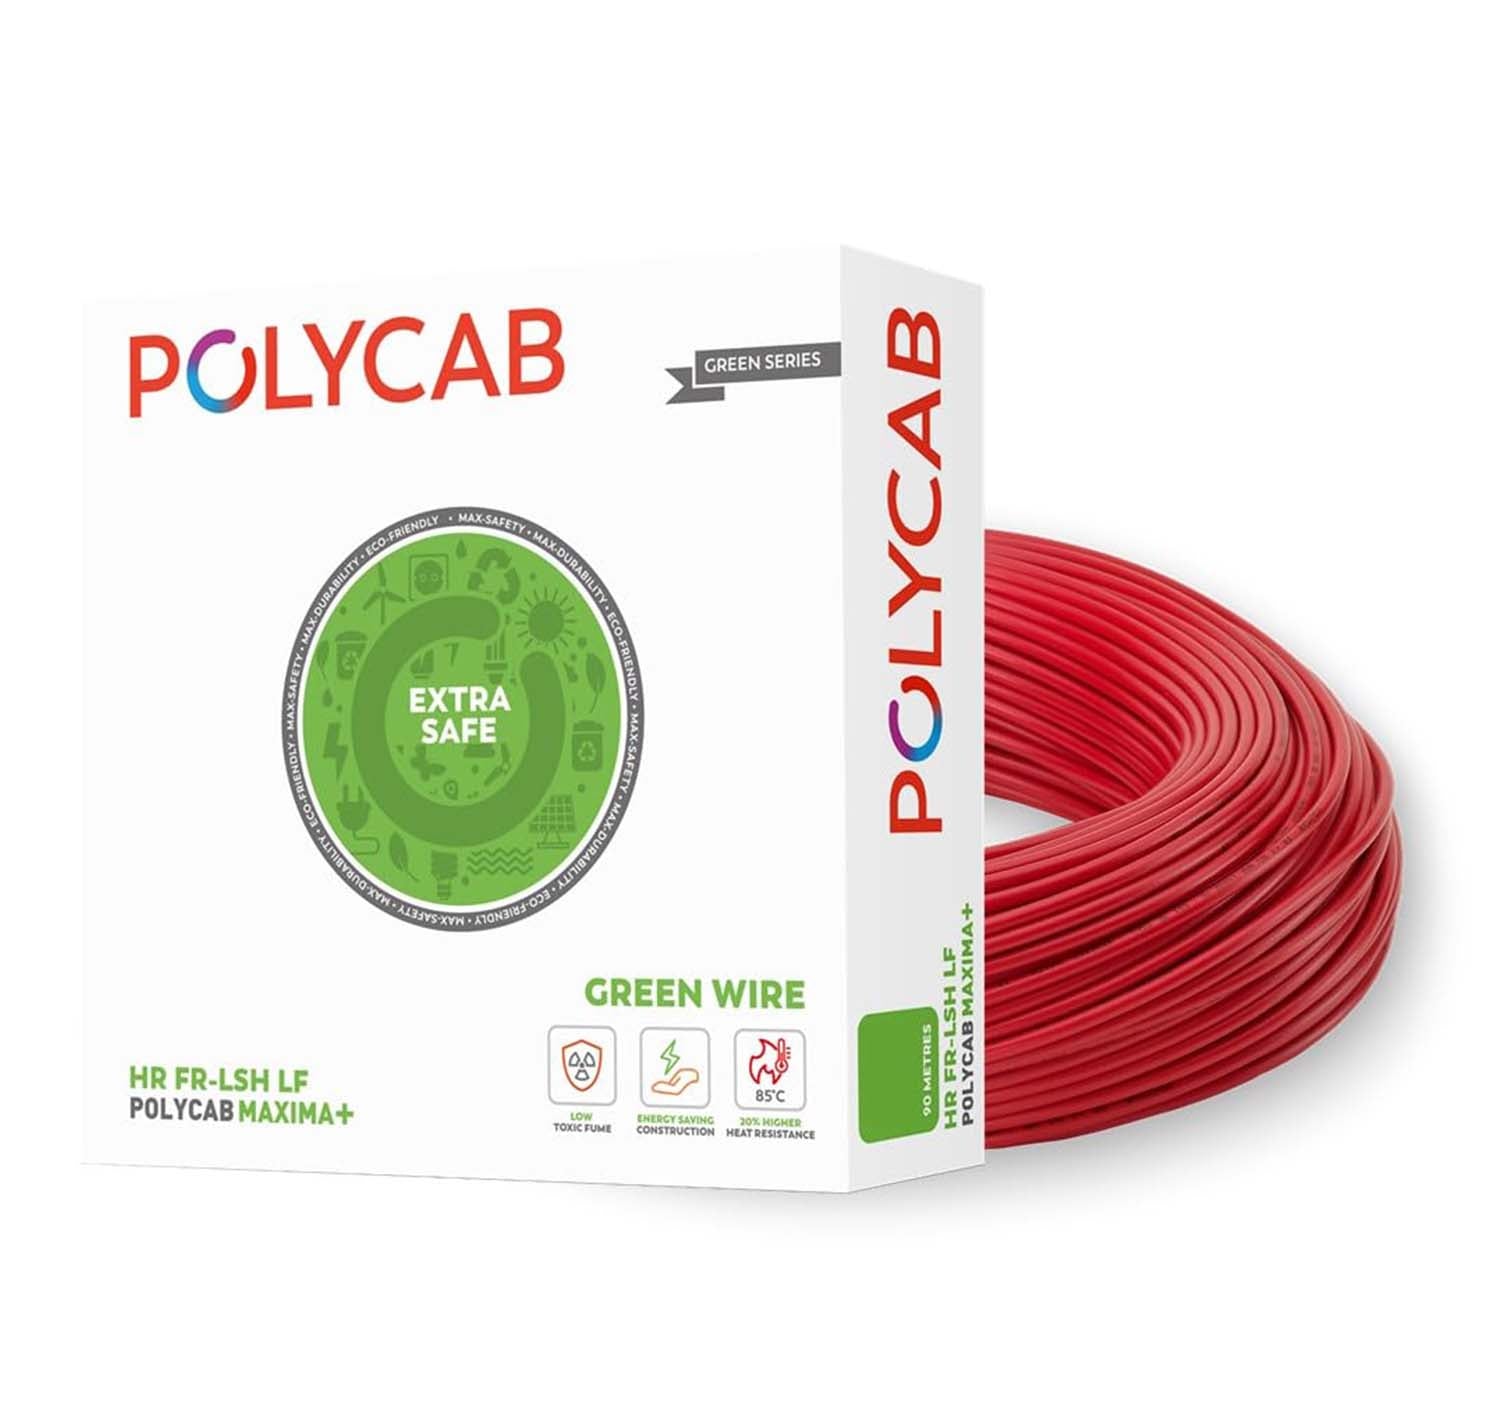 Polycab Maxima+ Domestic Electrical Wire - 90 Meter - Red Wire